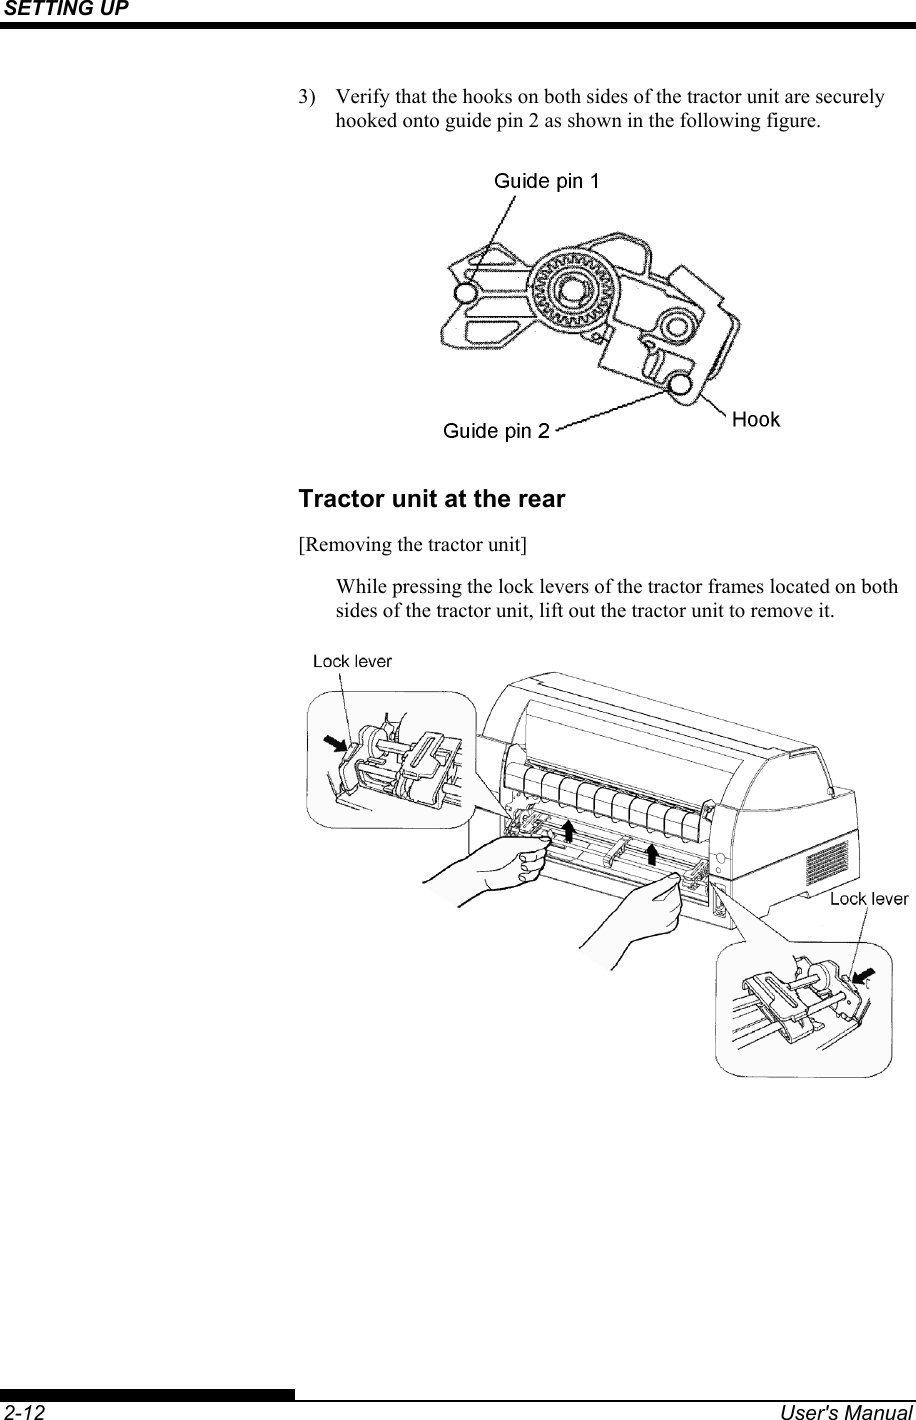 SETTING UP    2-12  User&apos;s Manual 3)  Verify that the hooks on both sides of the tractor unit are securely hooked onto guide pin 2 as shown in the following figure.  Tractor unit at the rear  [Removing the tractor unit] While pressing the lock levers of the tractor frames located on both sides of the tractor unit, lift out the tractor unit to remove it.  